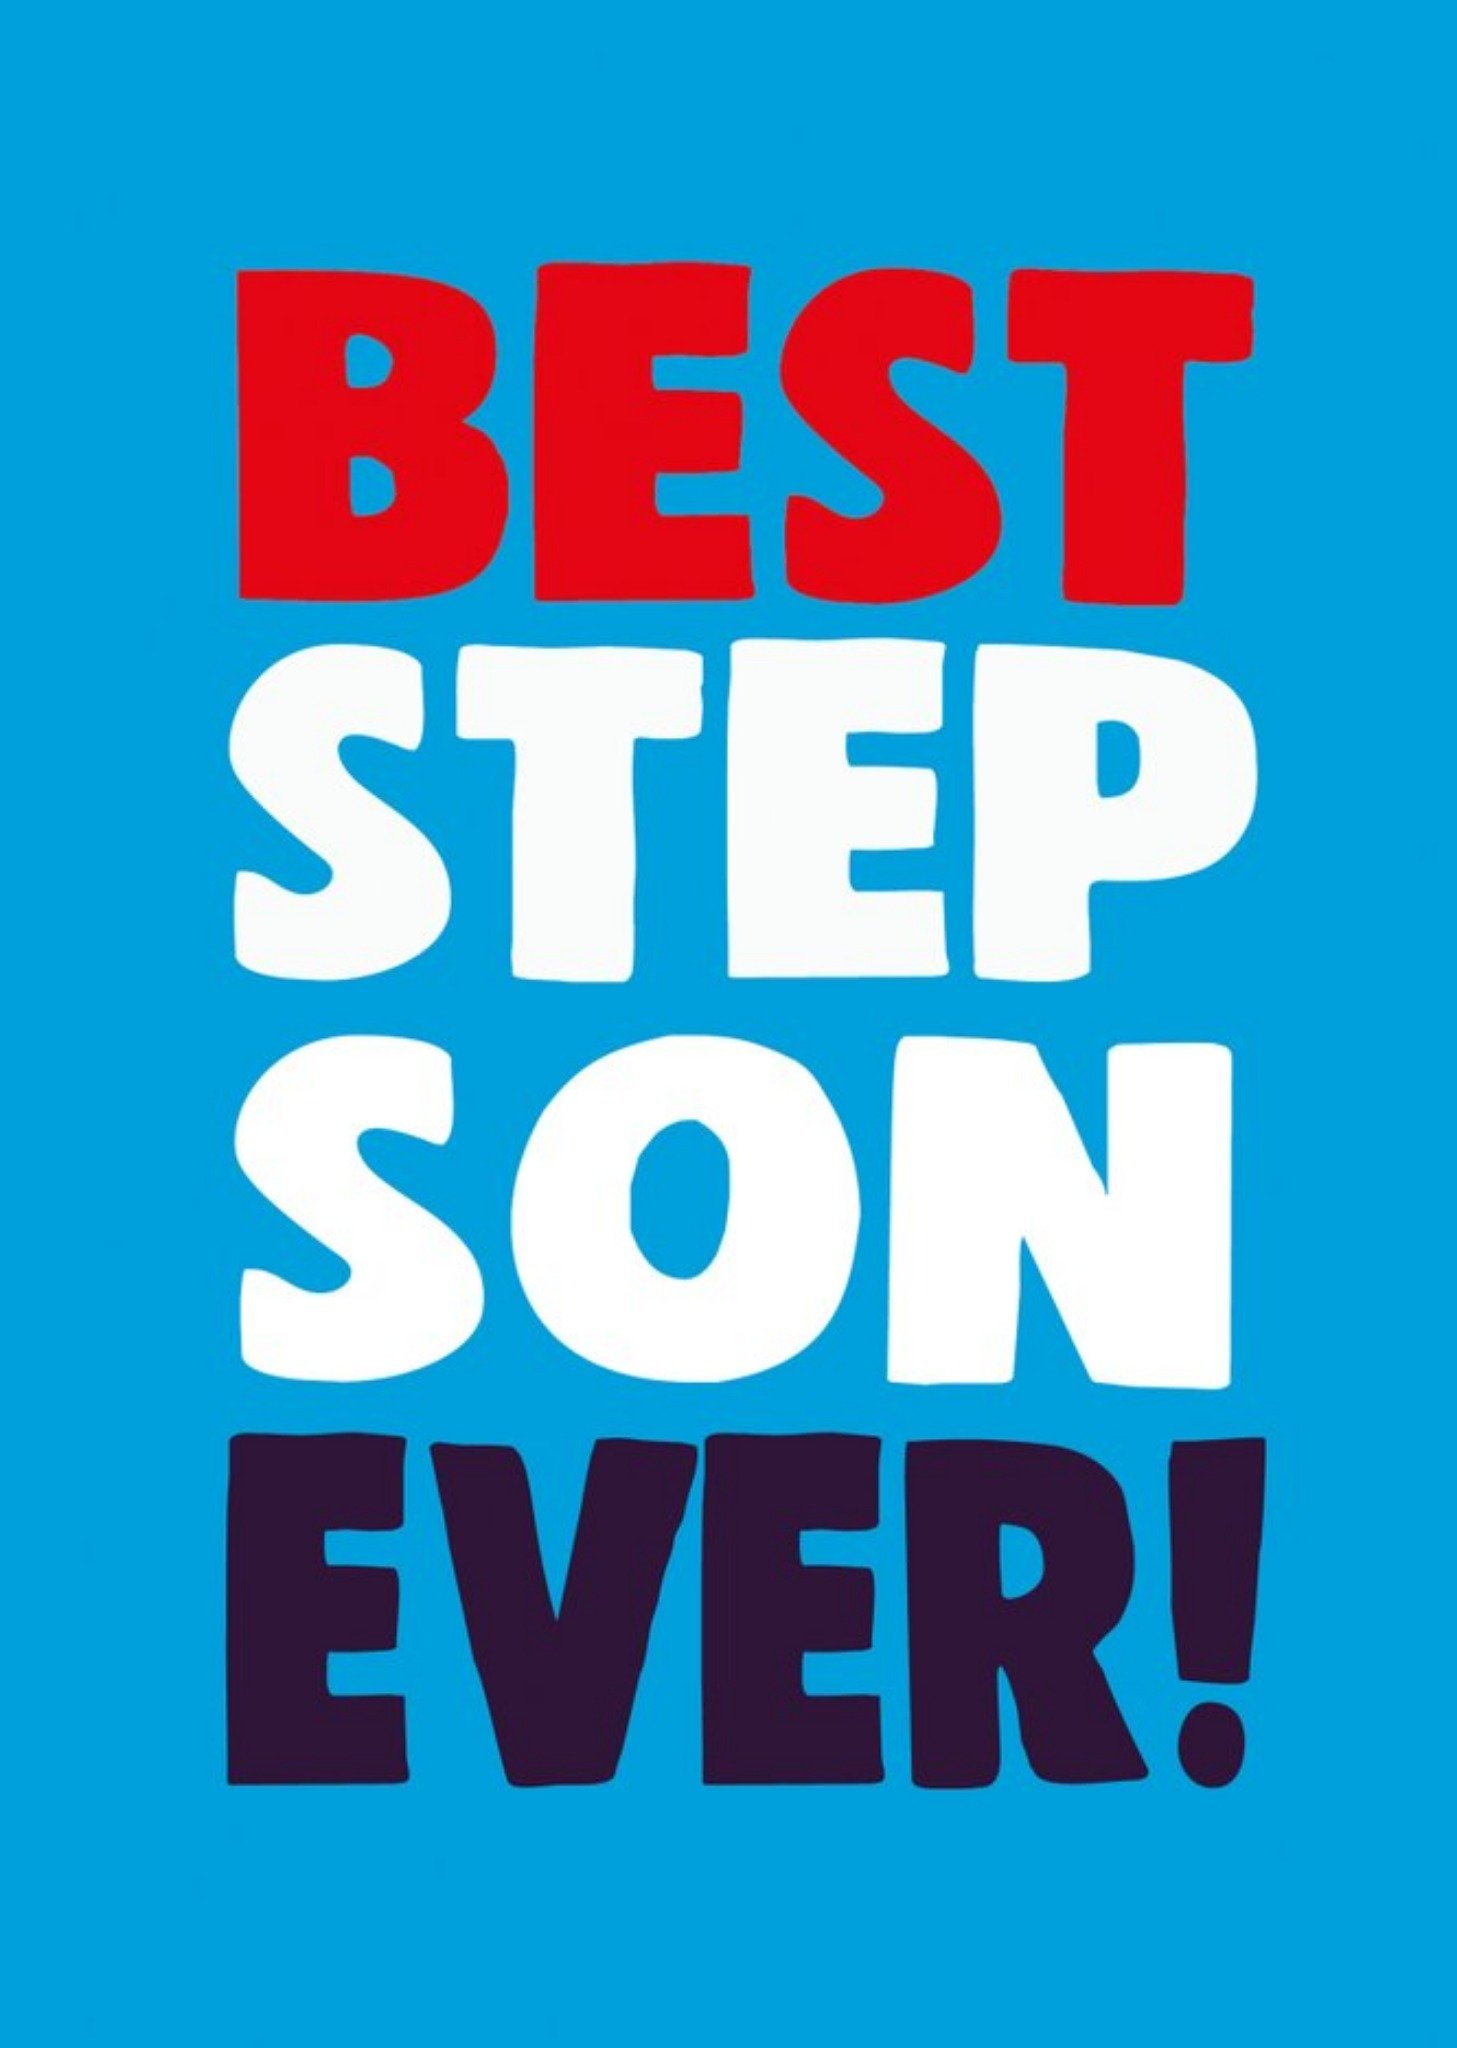 Moonpig Cheeky Chops Step Son Typographic Card, Large